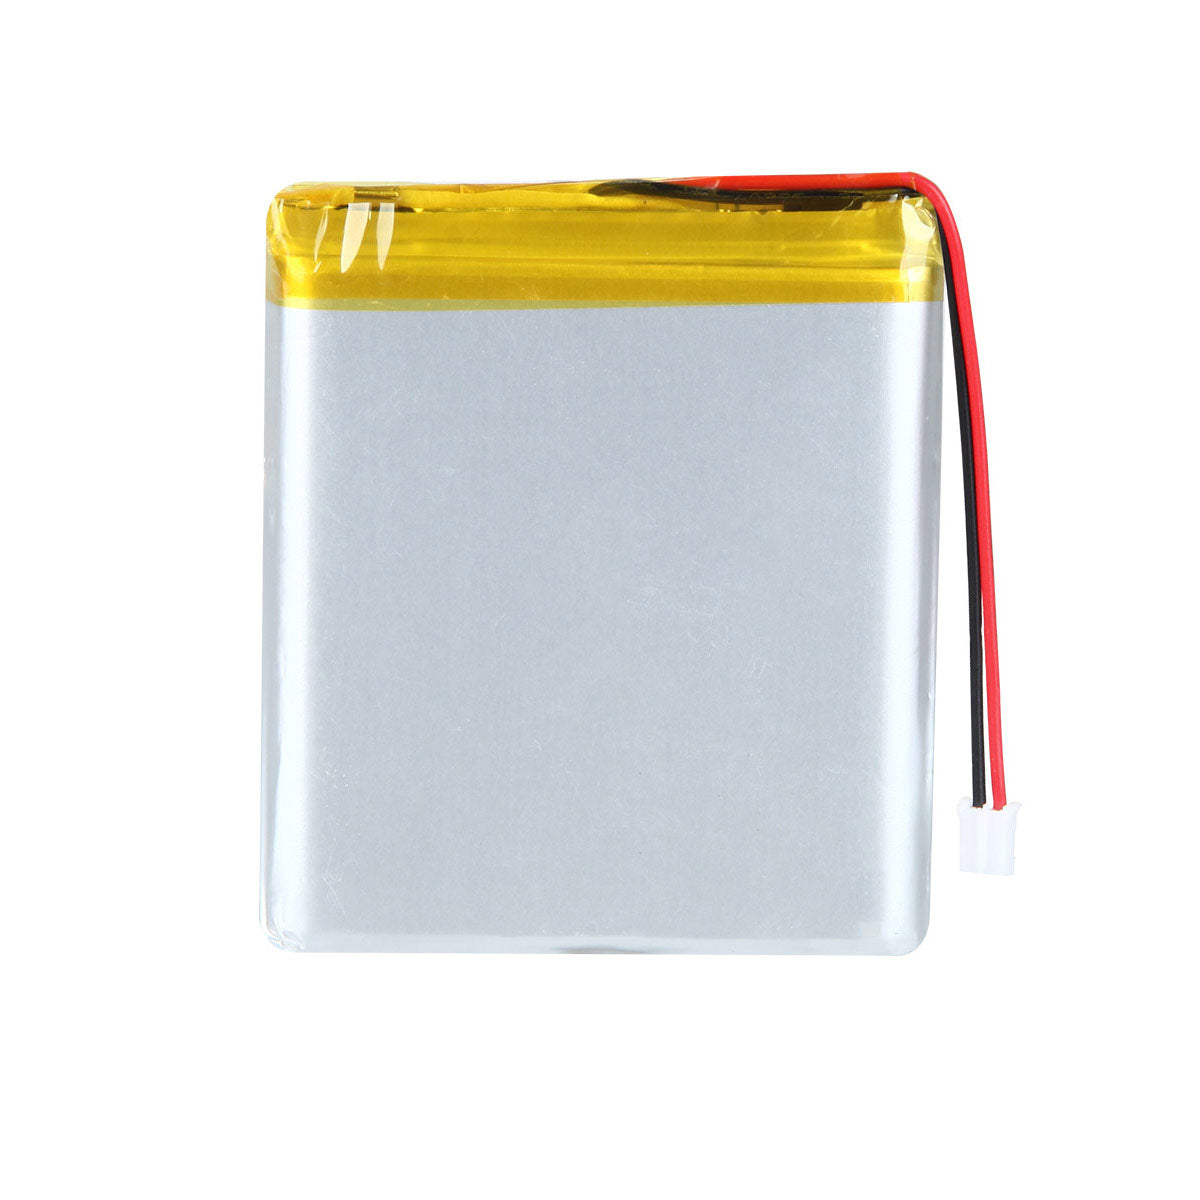 3.7V 5000mAh 106070 Rechargeable Lithium Polymer Battery